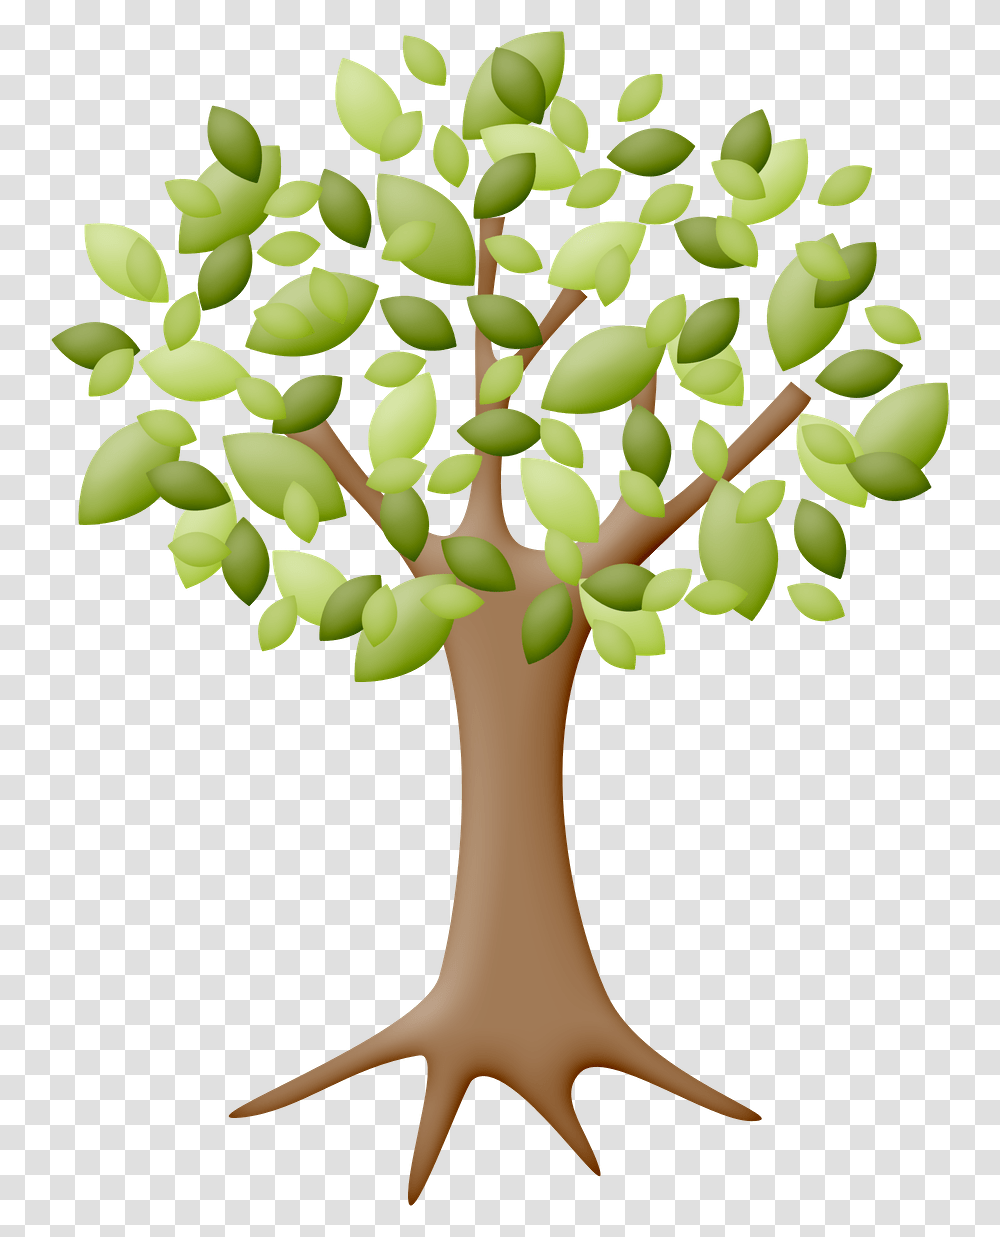 Cartoon Tree Without Leaves Drawing, Plant, Glass, Vase, Jar Transparent Png